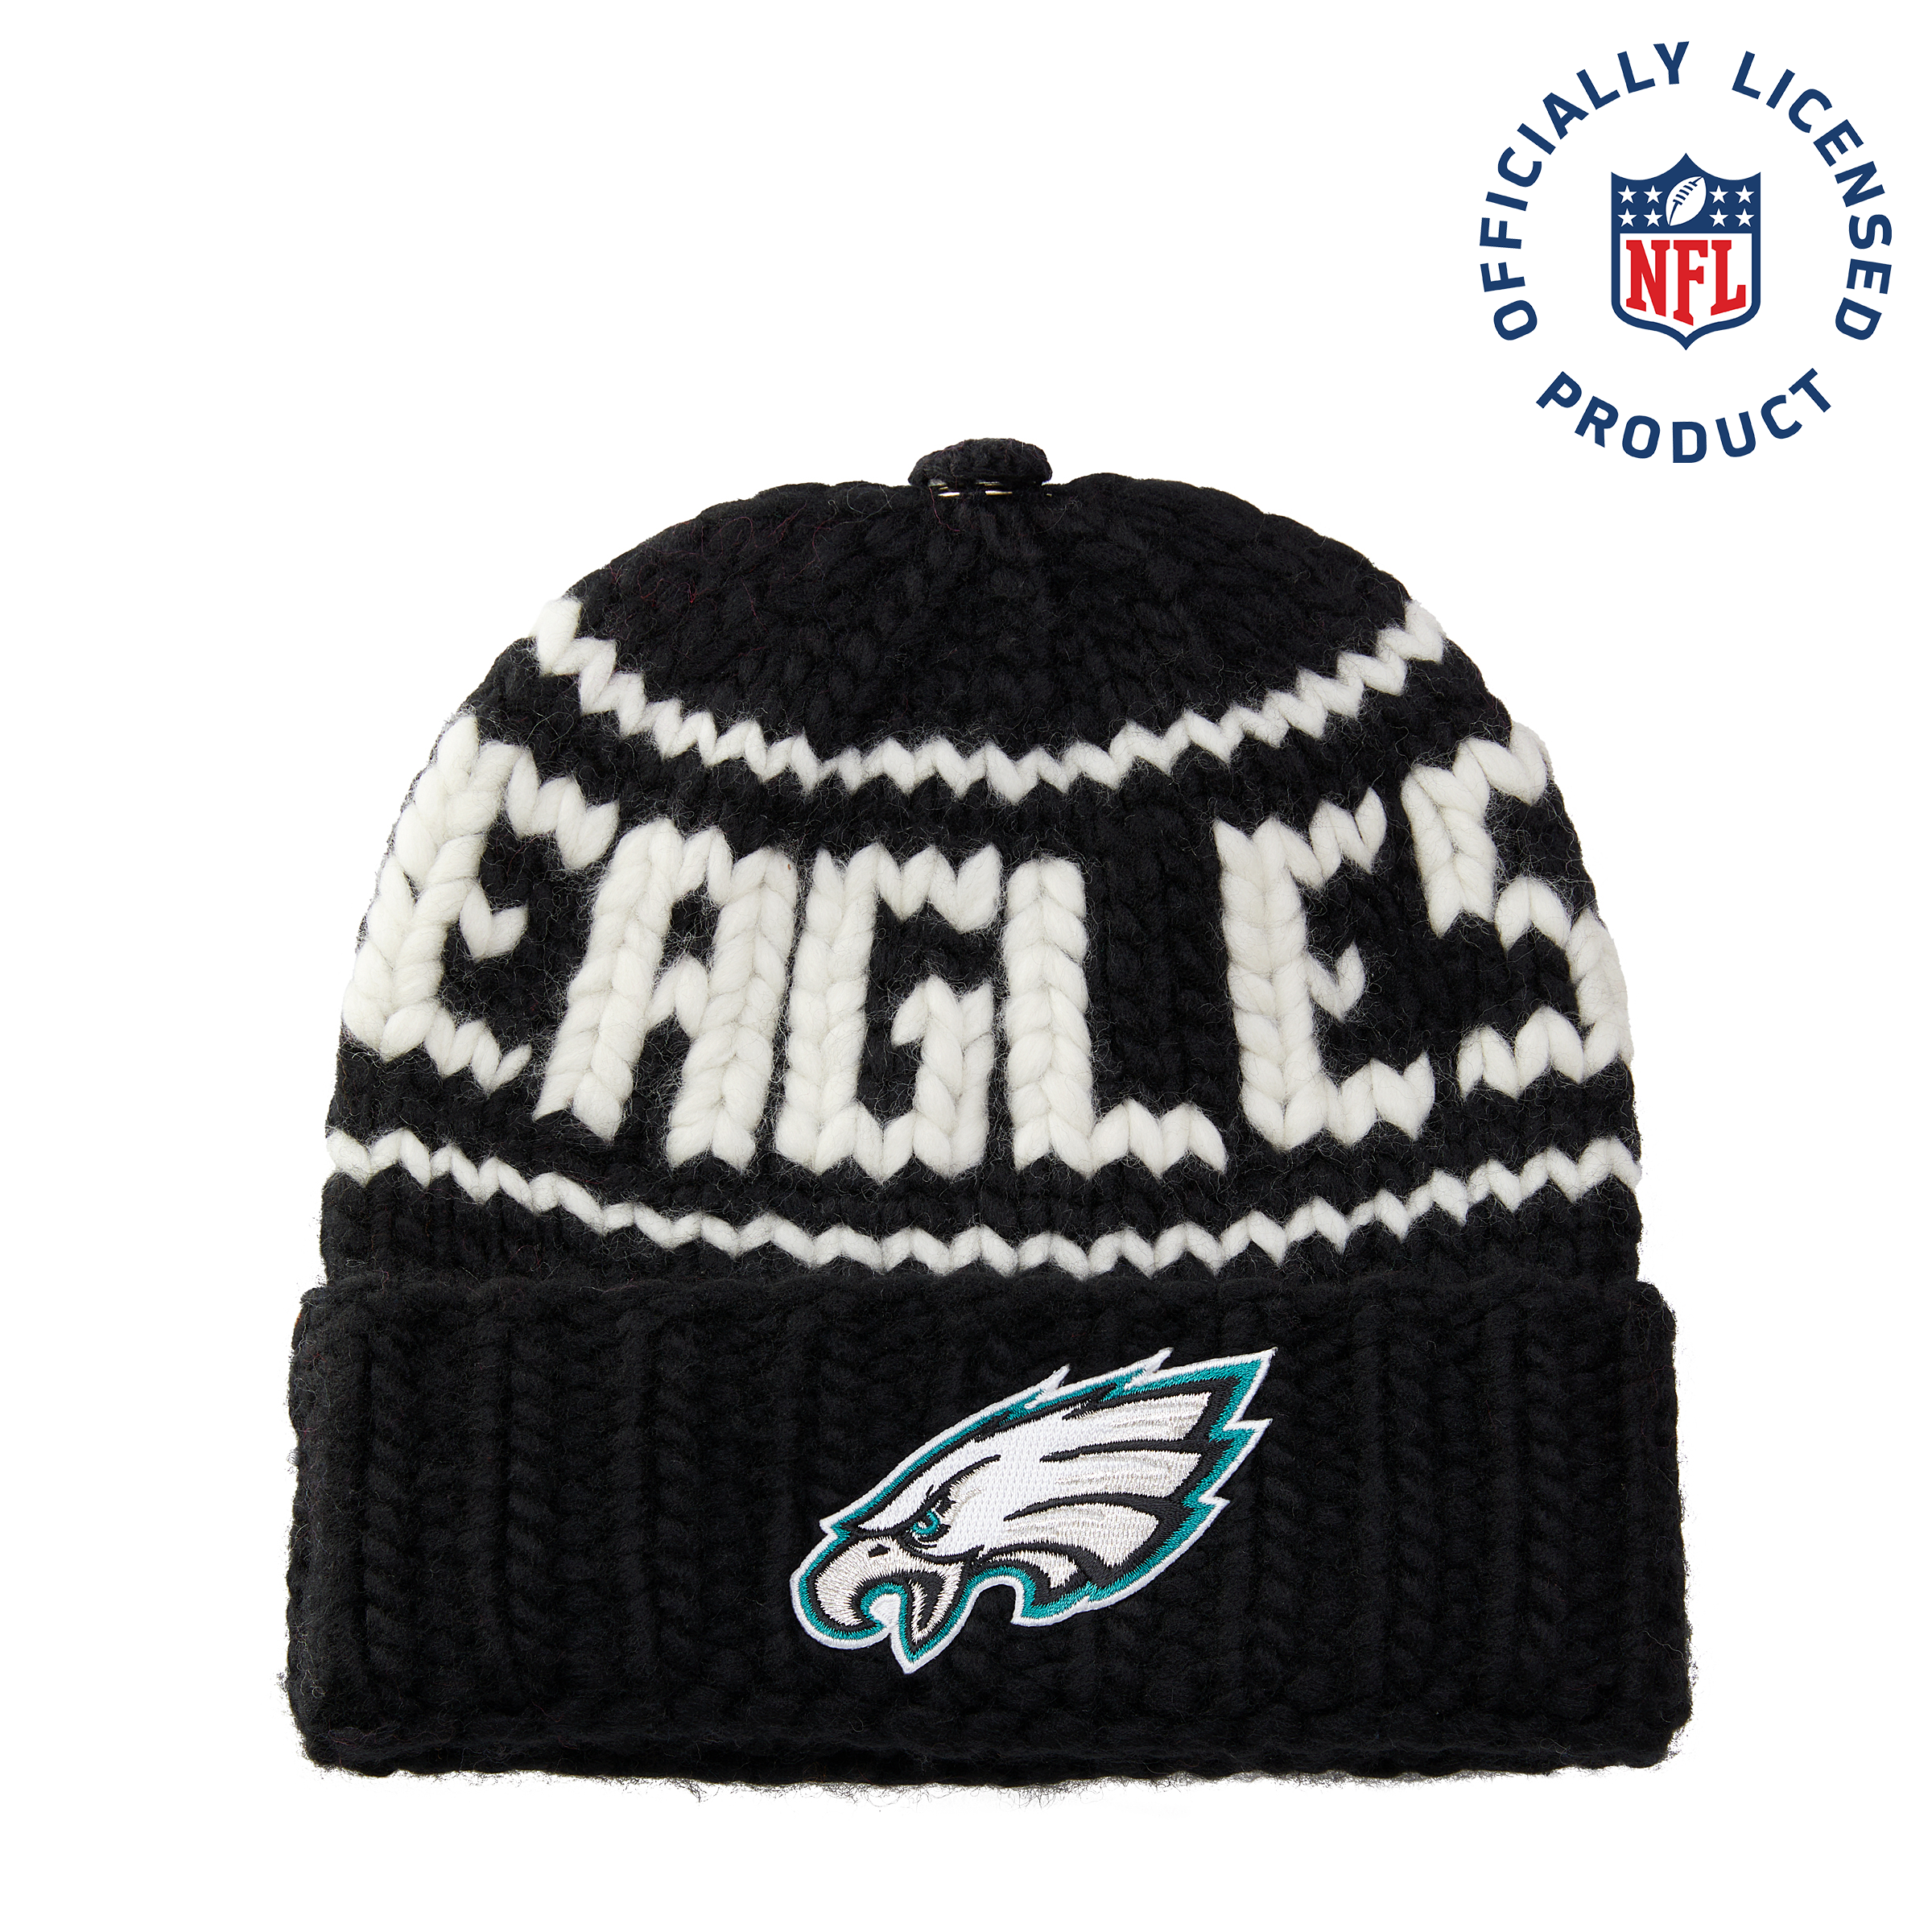 The Eagles NFL Beanie with Snap Cover